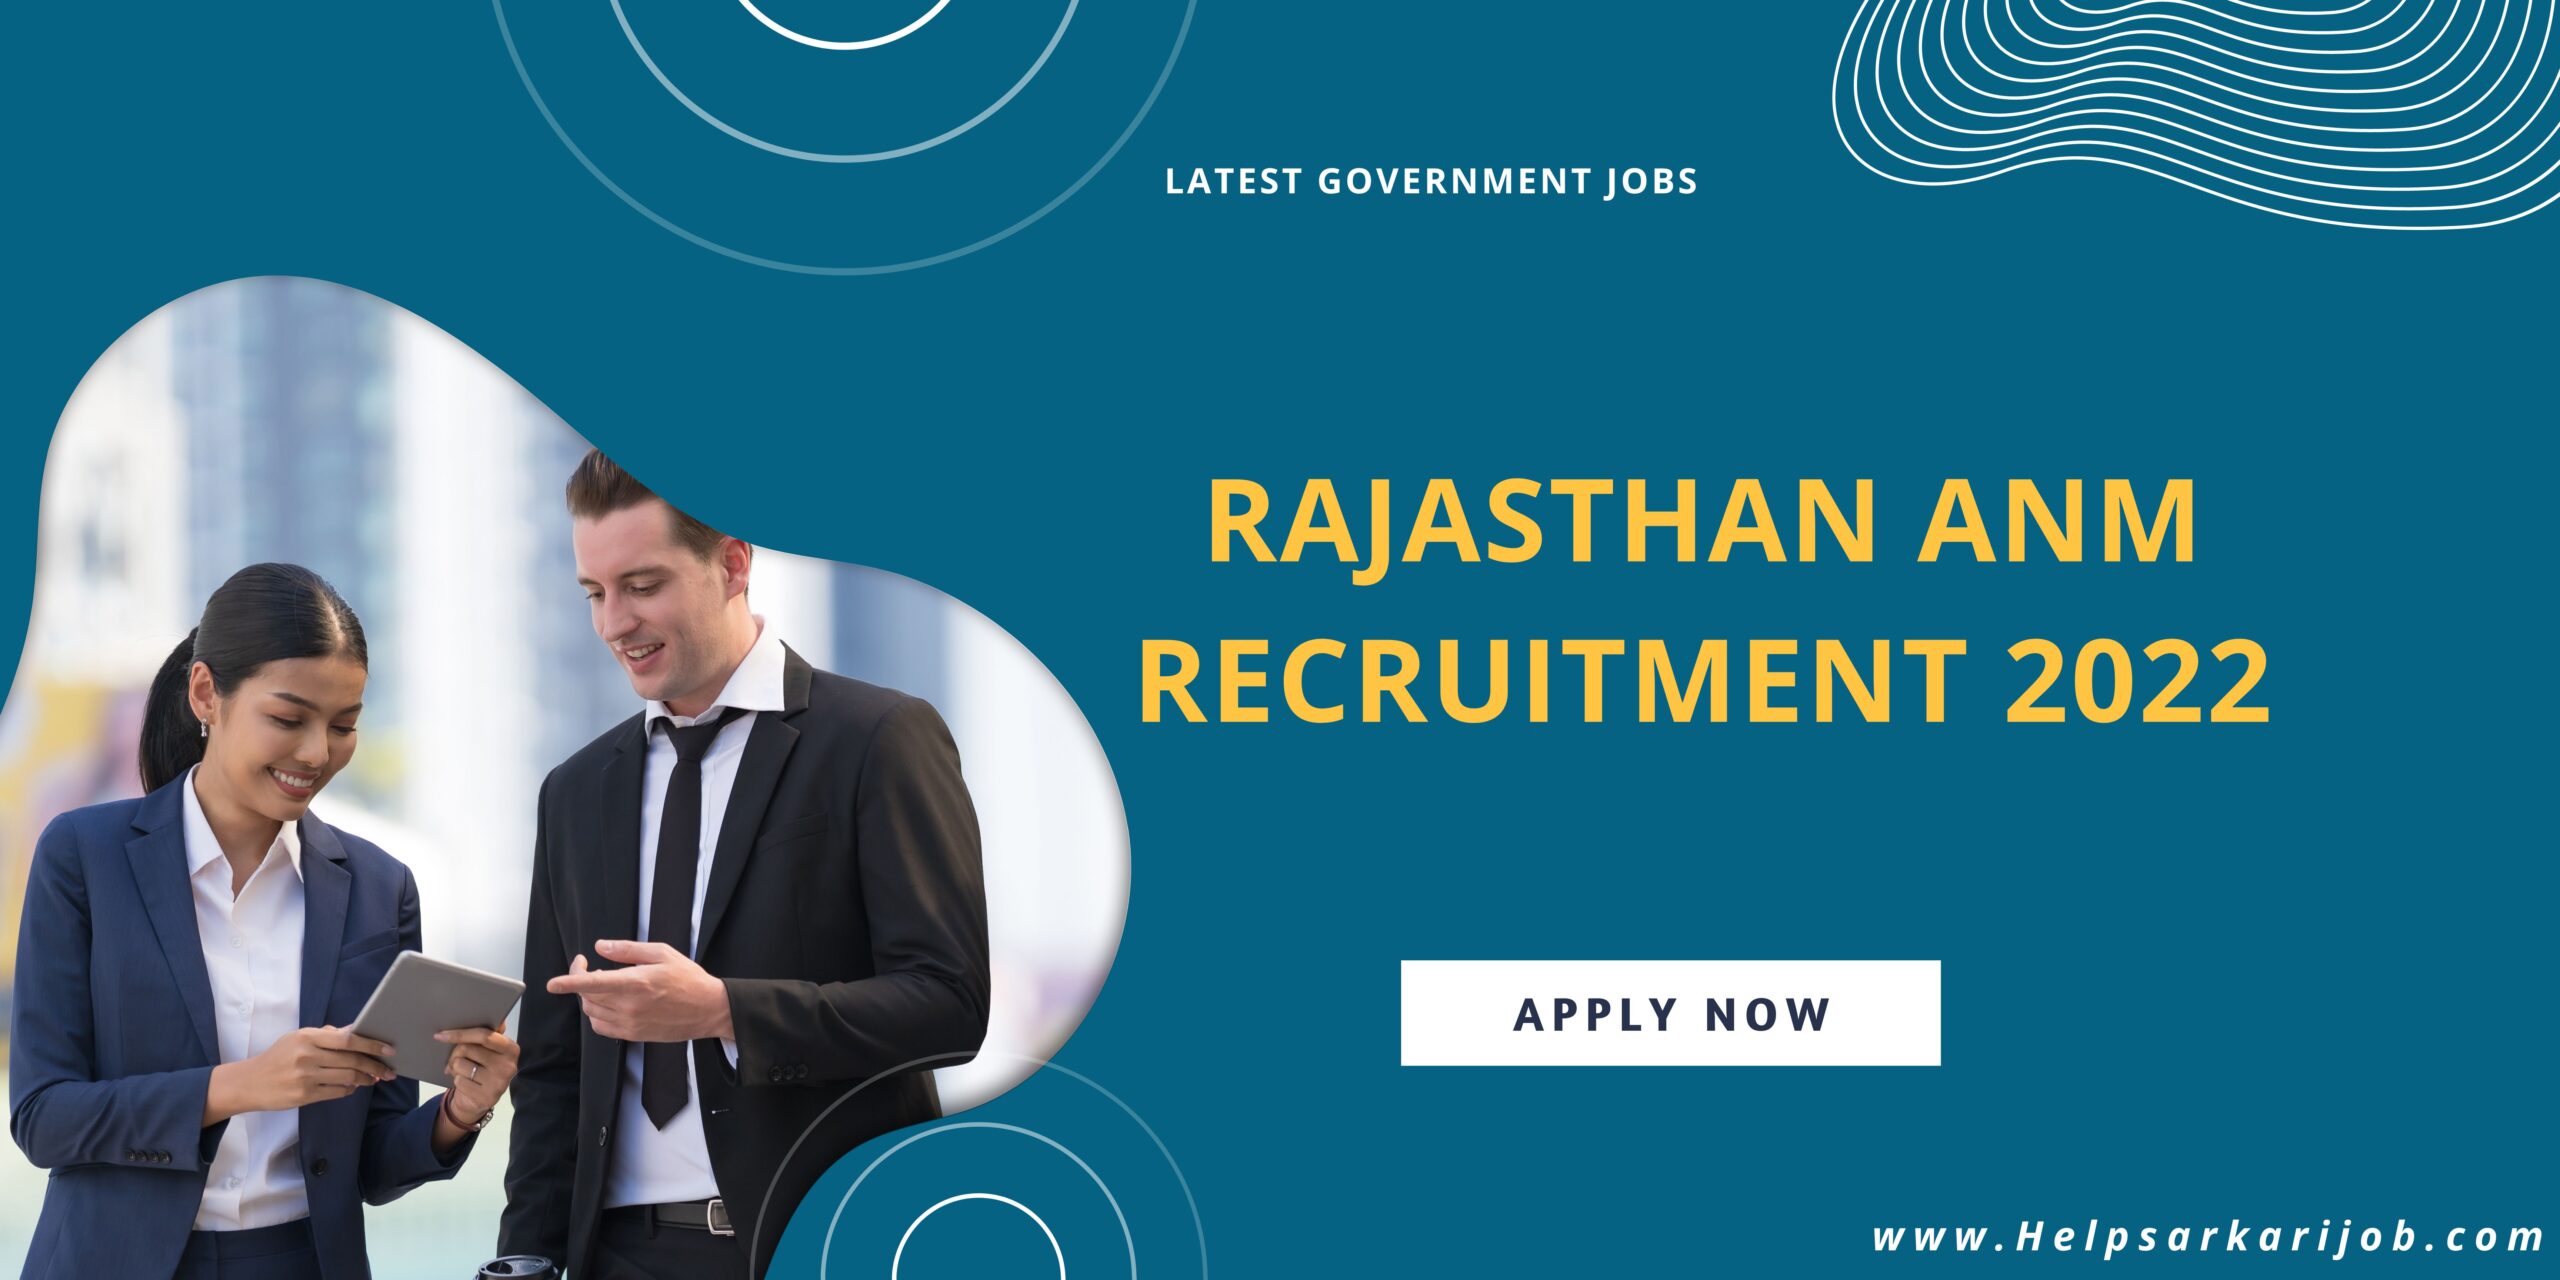 Rajasthan ANM Recruitment 2022 scaled -